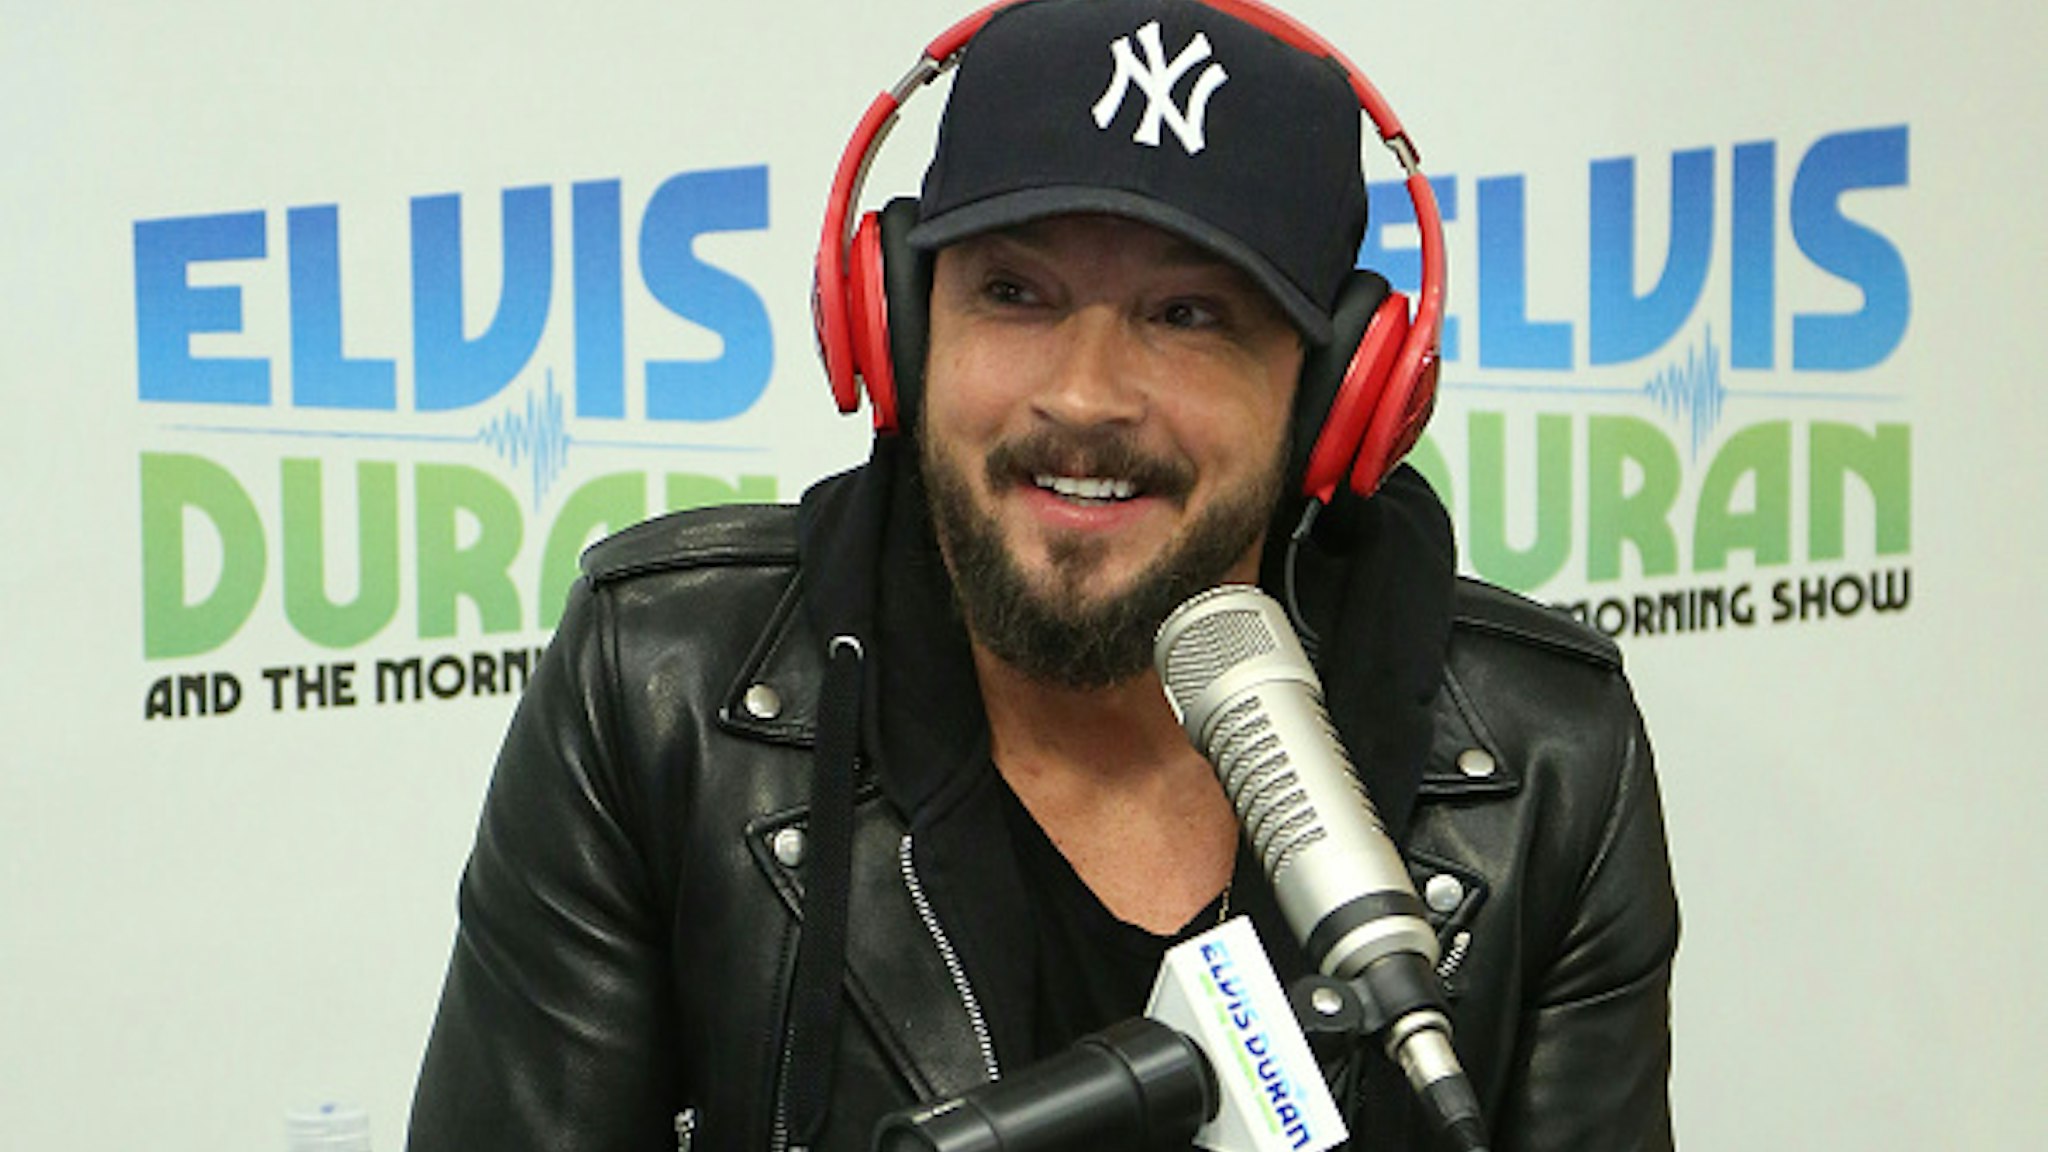 NEW YORK, NY - FEBRUARY 12: EXCLUSIVE COVERAGE/SPECIAL RATES APPLY Pastor Carl Lentz is interviewed during the "Elvis Duran Z100 Morning Show" at Z100 Studio on February 12, 2015 in New York City.